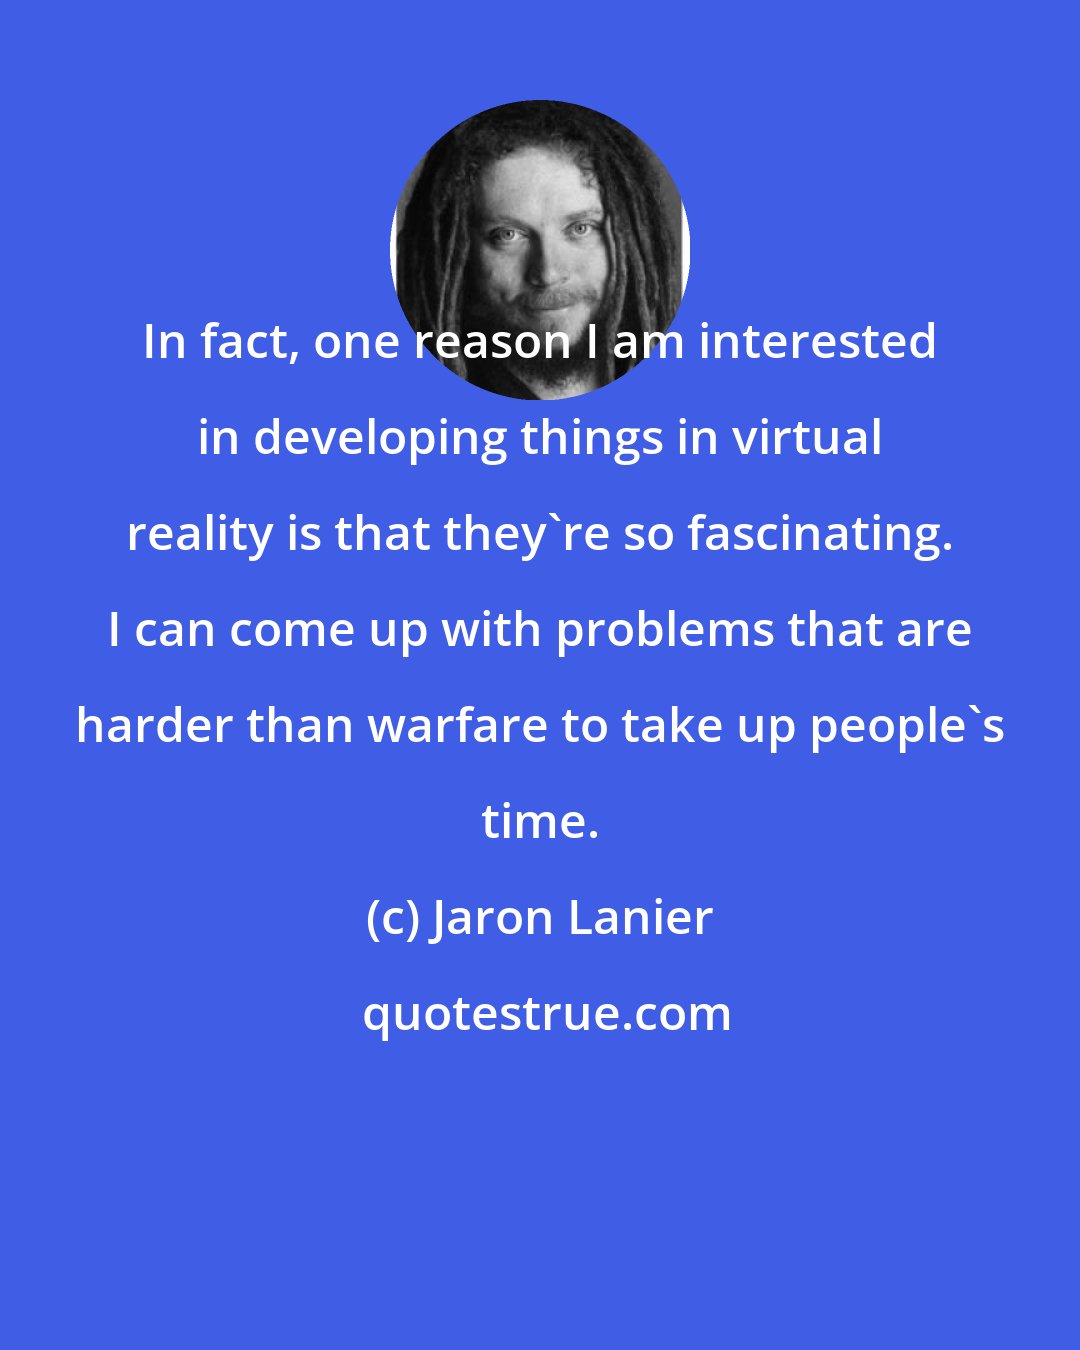 Jaron Lanier: In fact, one reason I am interested in developing things in virtual reality is that they're so fascinating. I can come up with problems that are harder than warfare to take up people's time.